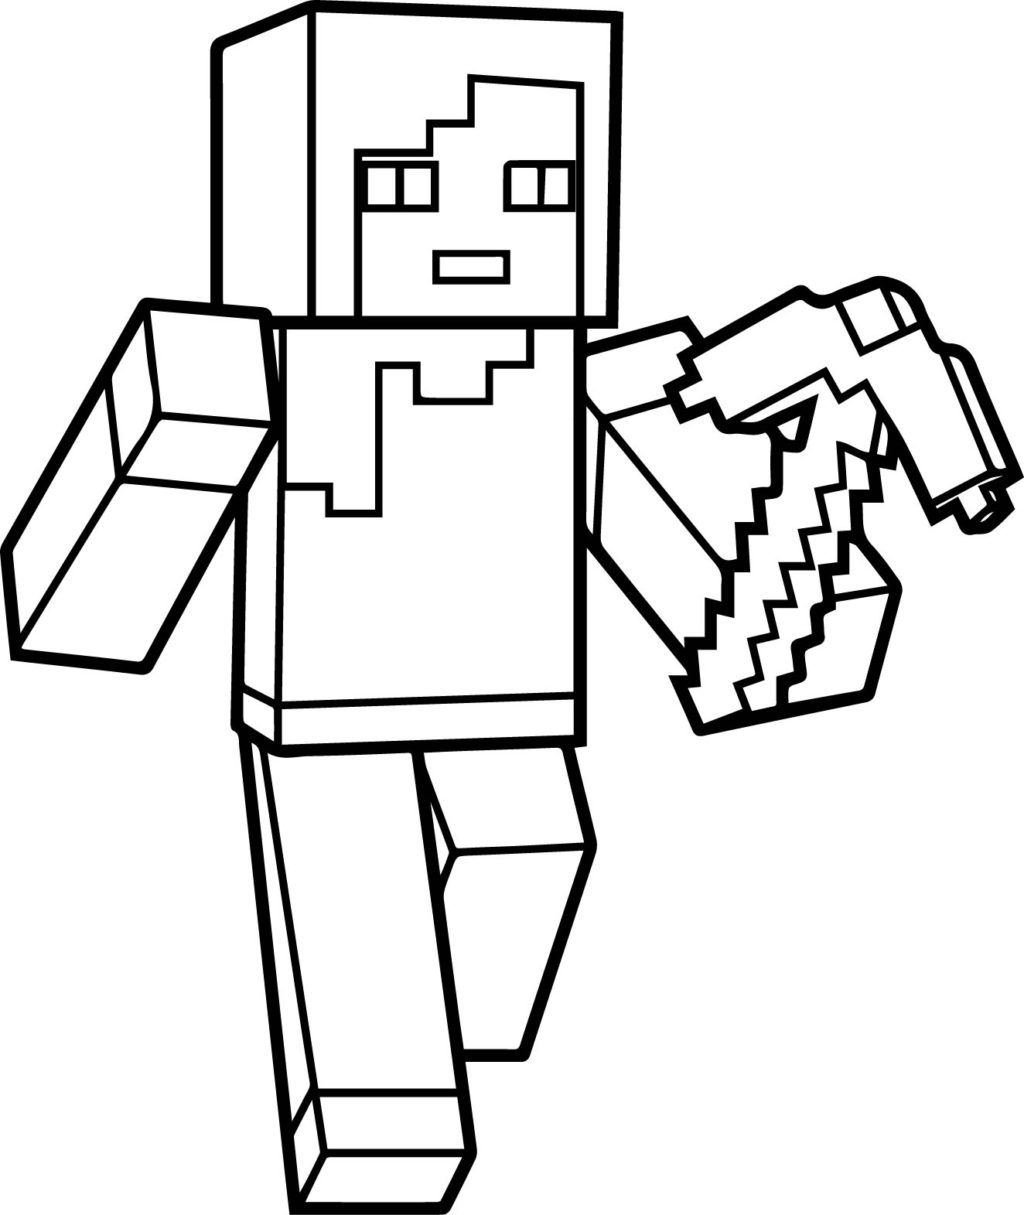 Herobrine Coloring Pages Coloring Book World Coloring Bookorld Free Minecraft Pages For